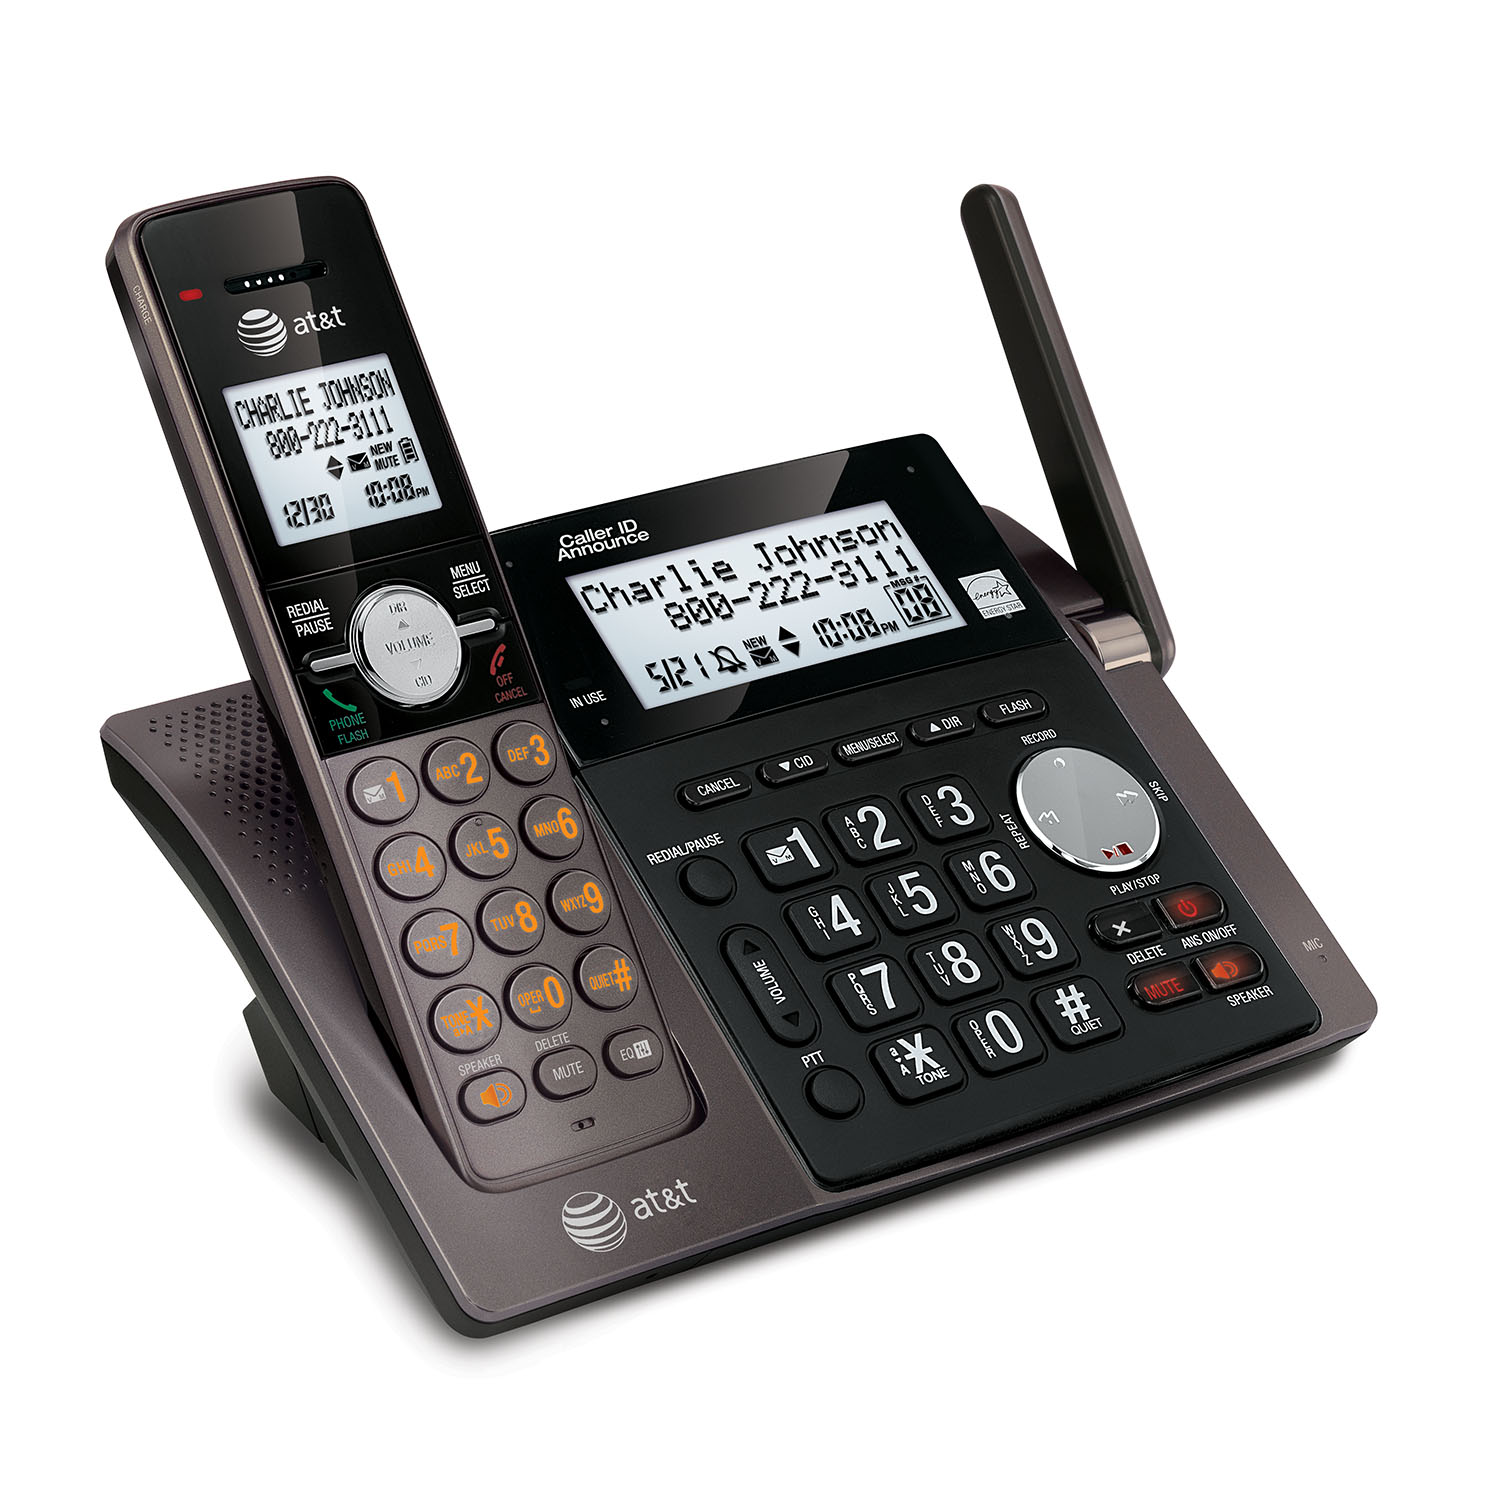 6 handset cordless answering system with caller ID/call waiting - view 3